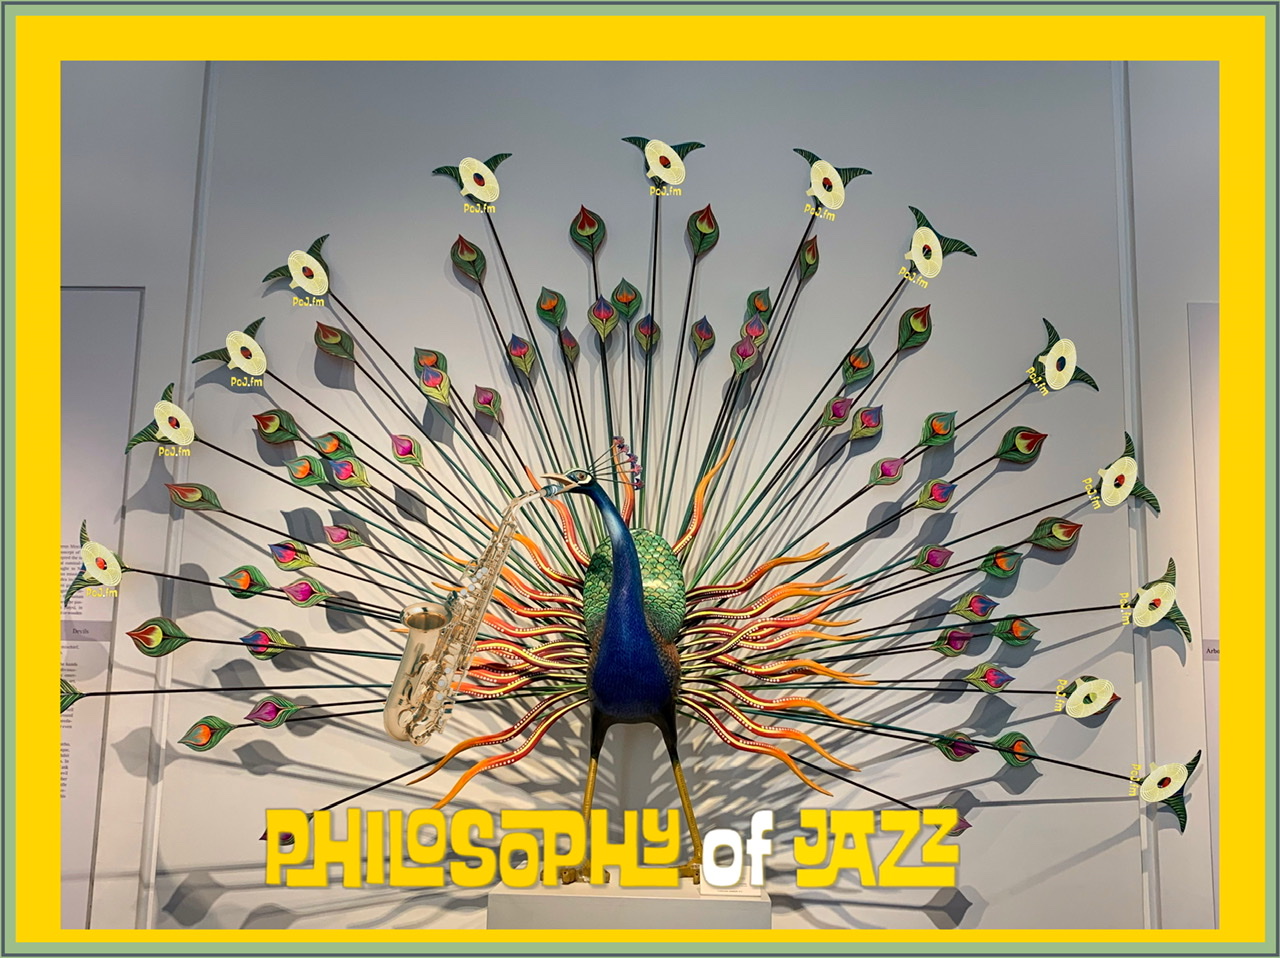 A photograph of an artwork peacock made of glass in Mexico City, Mexico at the Museo de Arte Popular showing the outermost peacock feathers having a PoJ.fm logo and at the foot of the graphic are the words Philosophy of Jazz written in yellow with an outer light green border and a thicker yelllow inner border.